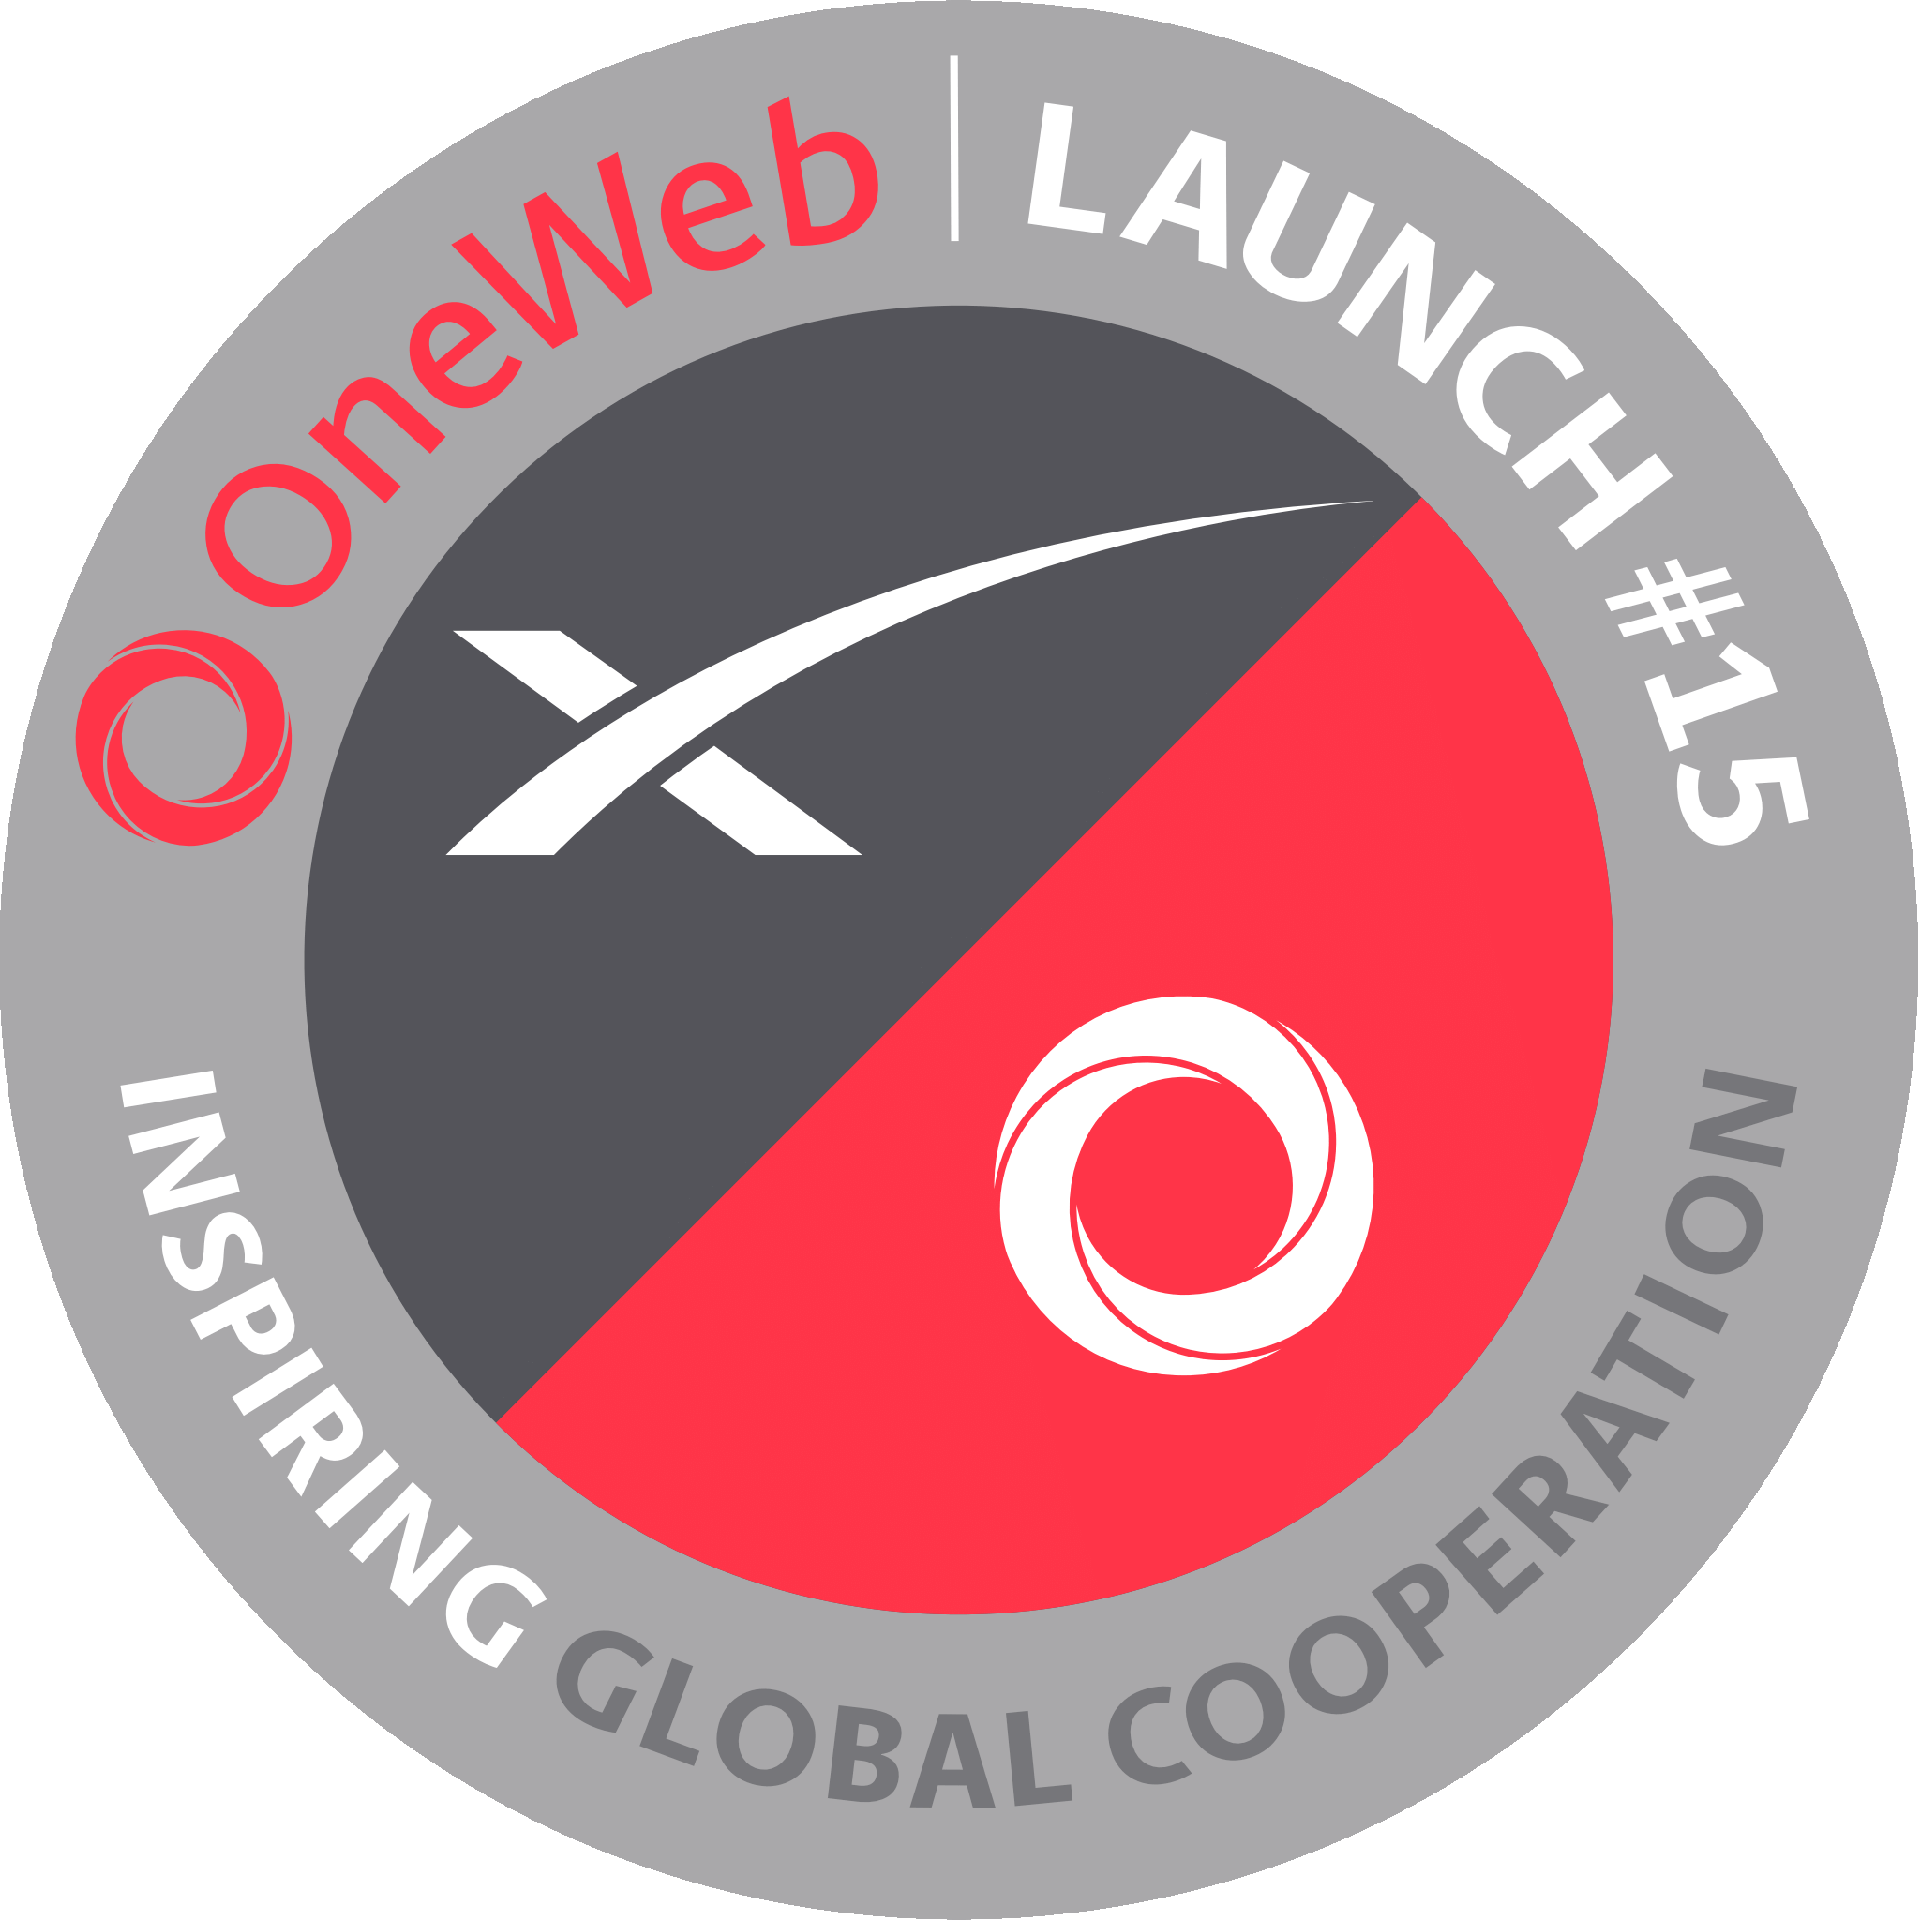 Mission patch for OneWeb 15